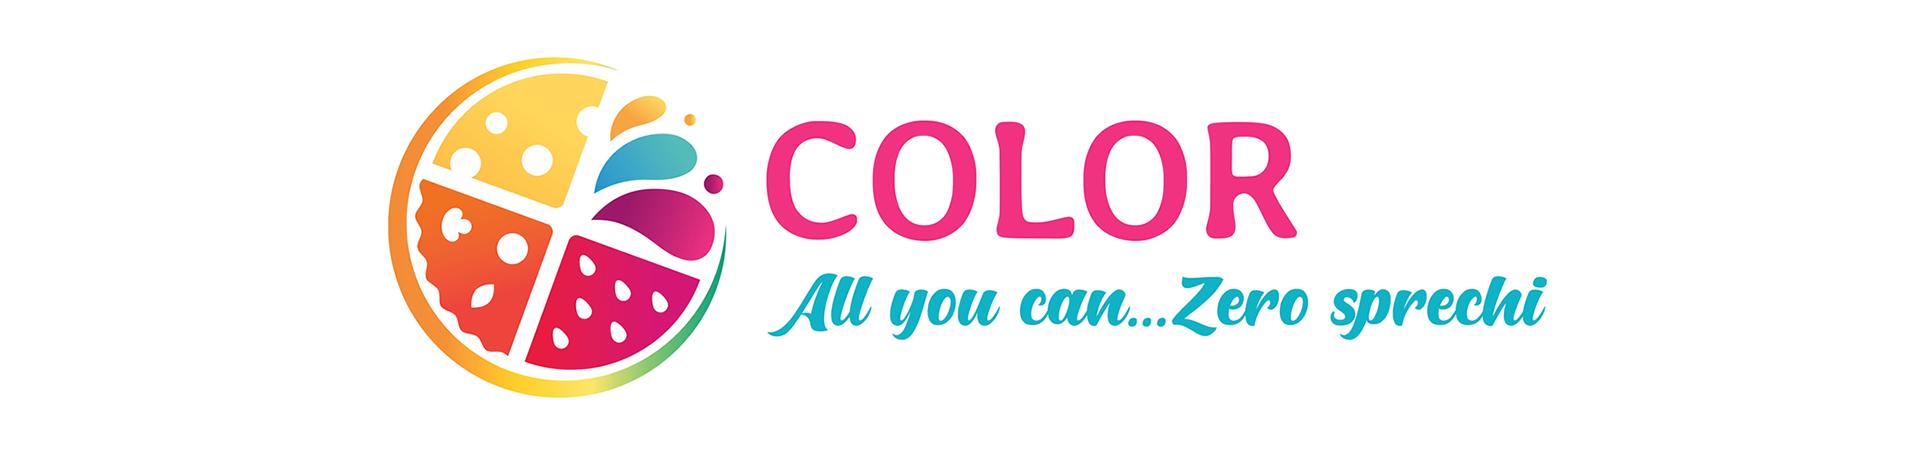 colorholiday en all-you-can-zero-waste 008